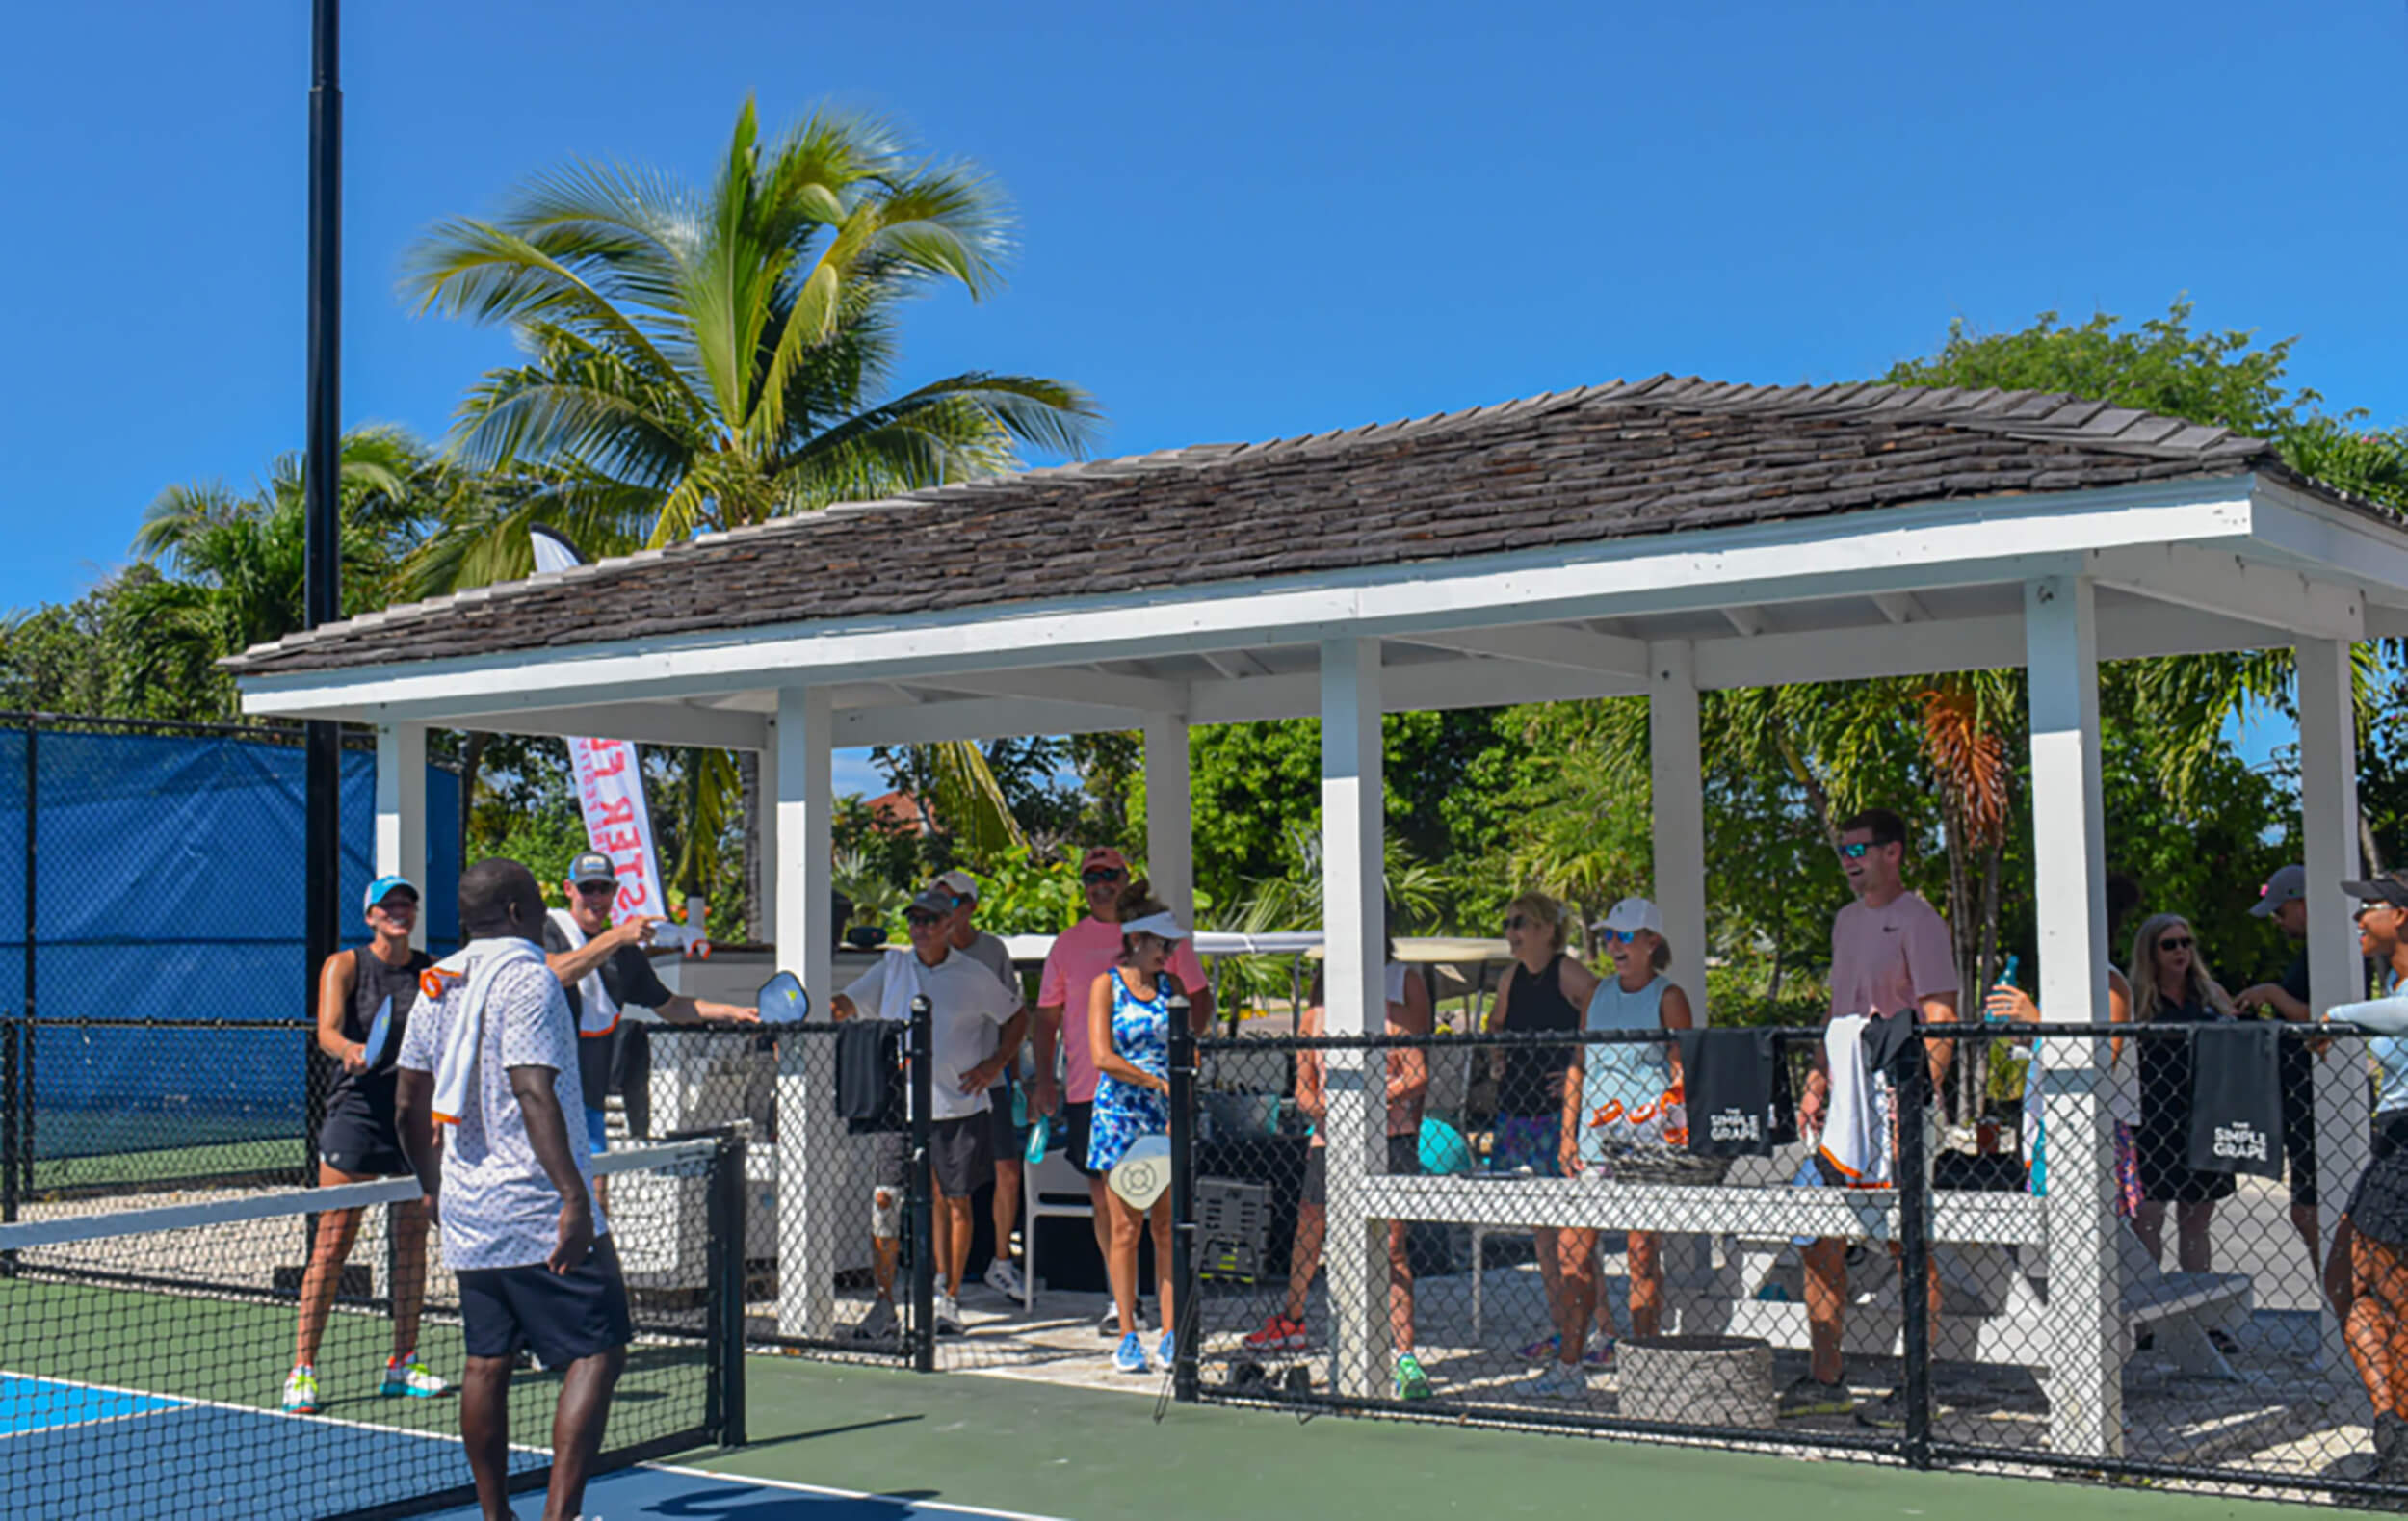 People at a pickle ball court chatting and enjoying club lifestyle at The Abaco Club